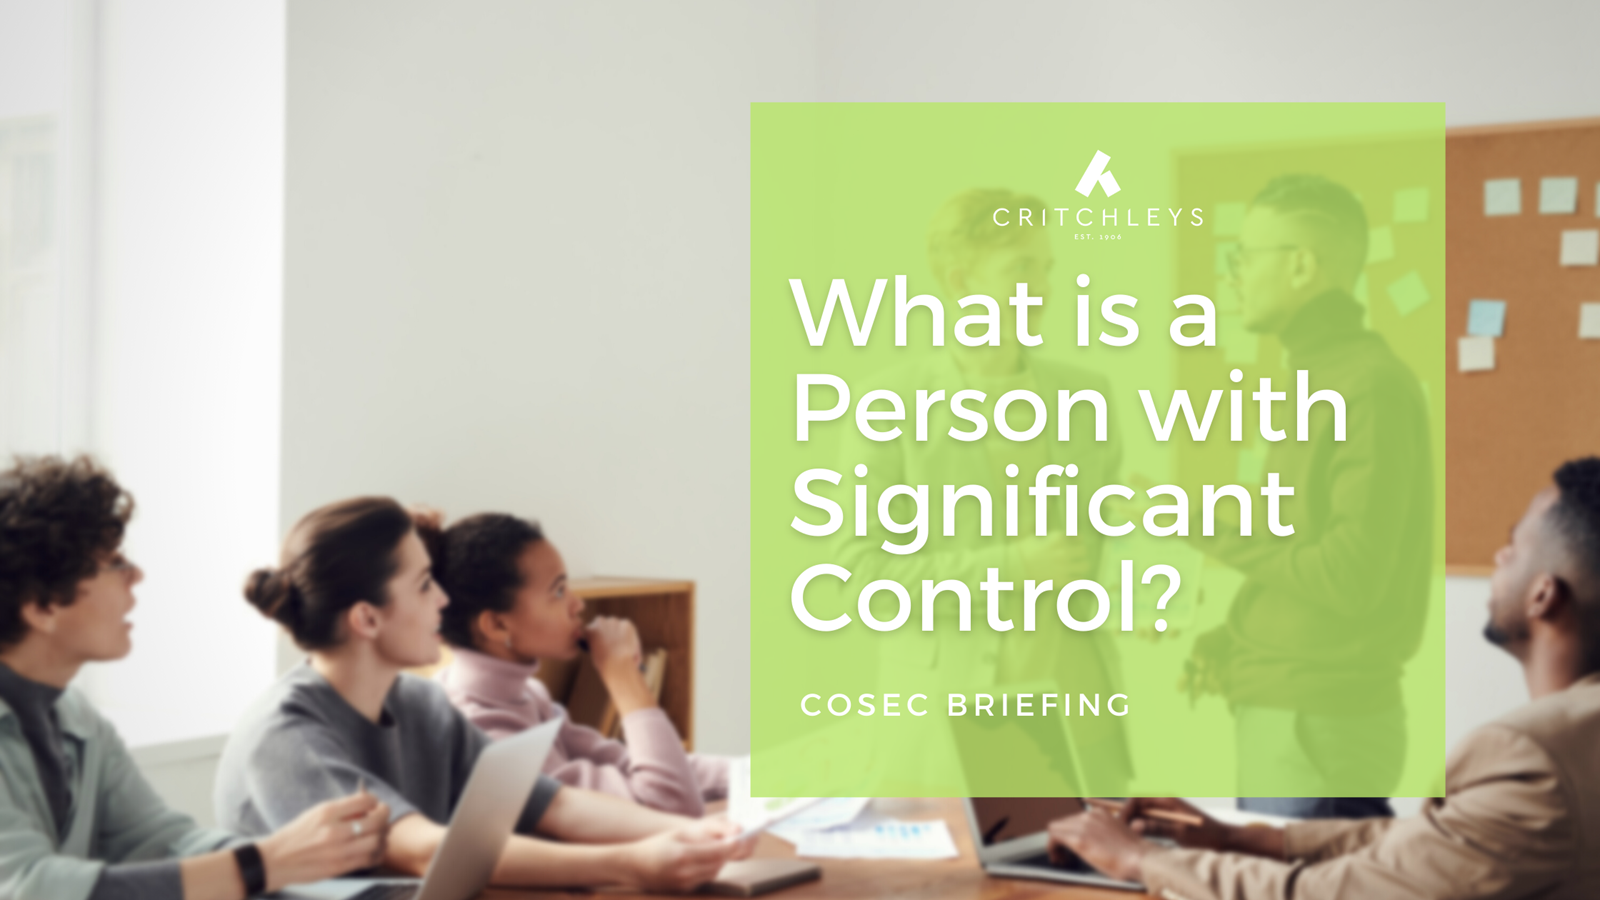 What is a Person with Significant Control?